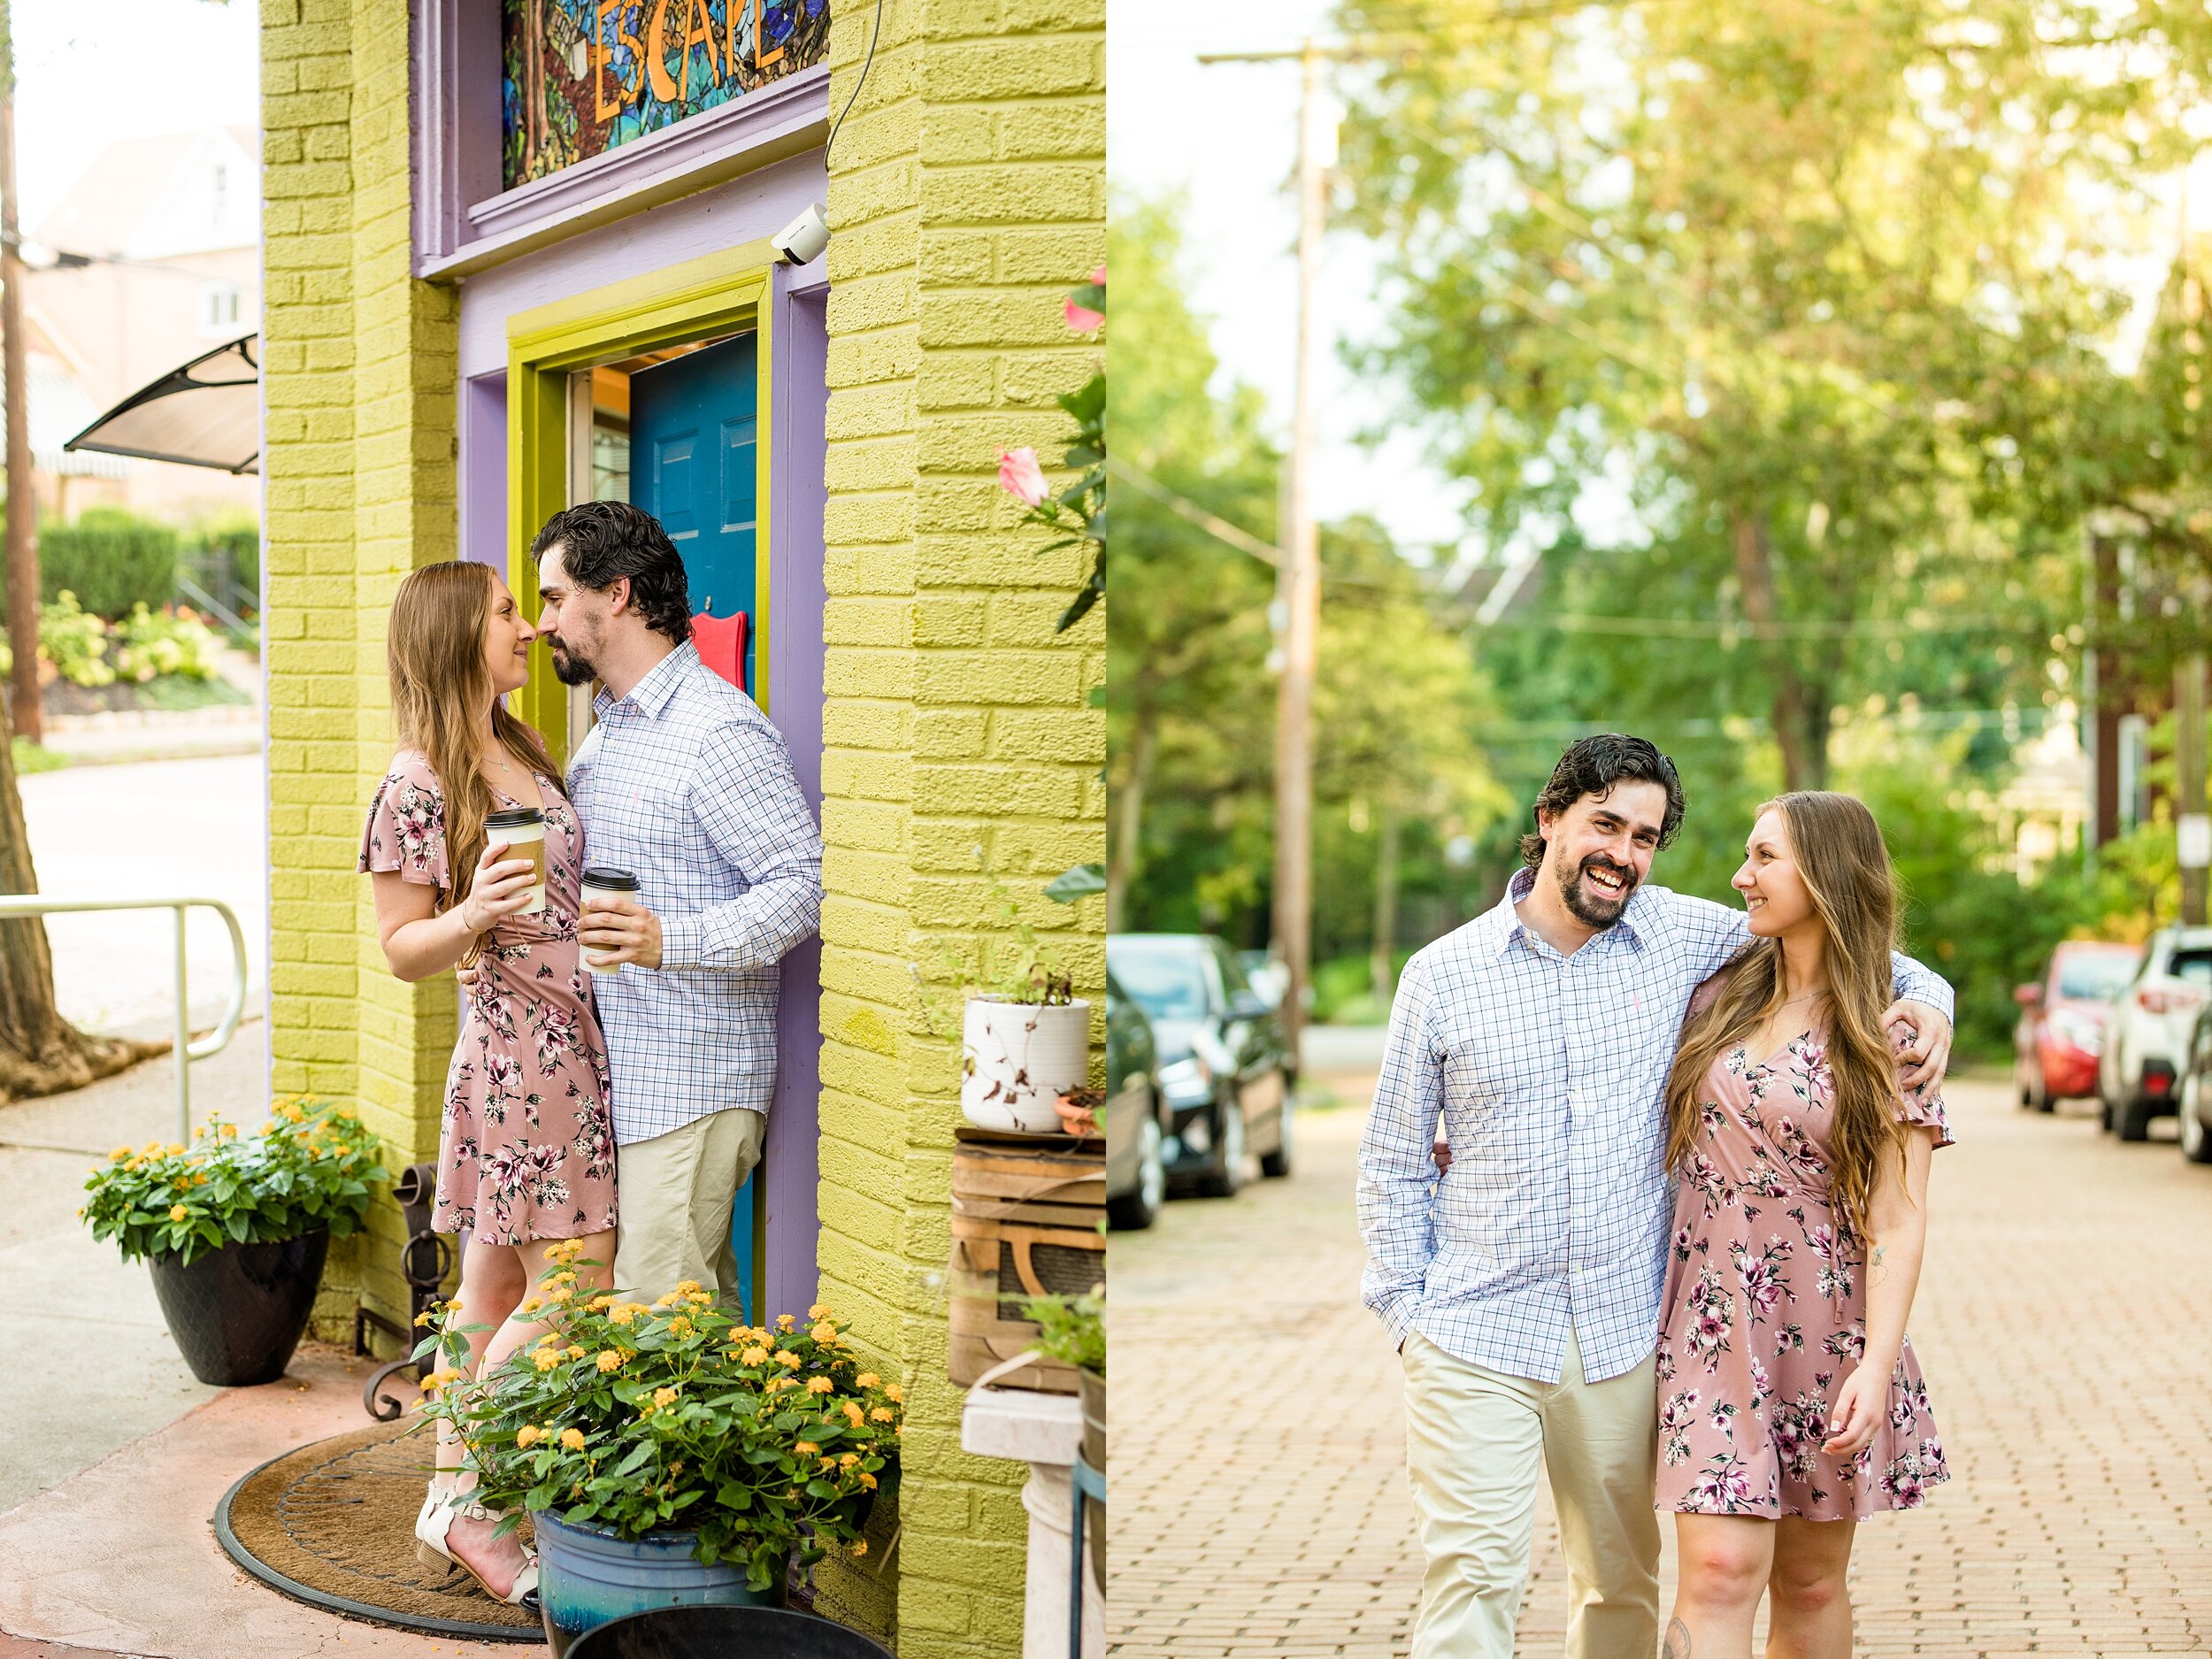 biddles escape pittsburgh, coffee shop engagement photos, madeleine bakery and bistro pittsburgh, pittsburgh engagement photographer